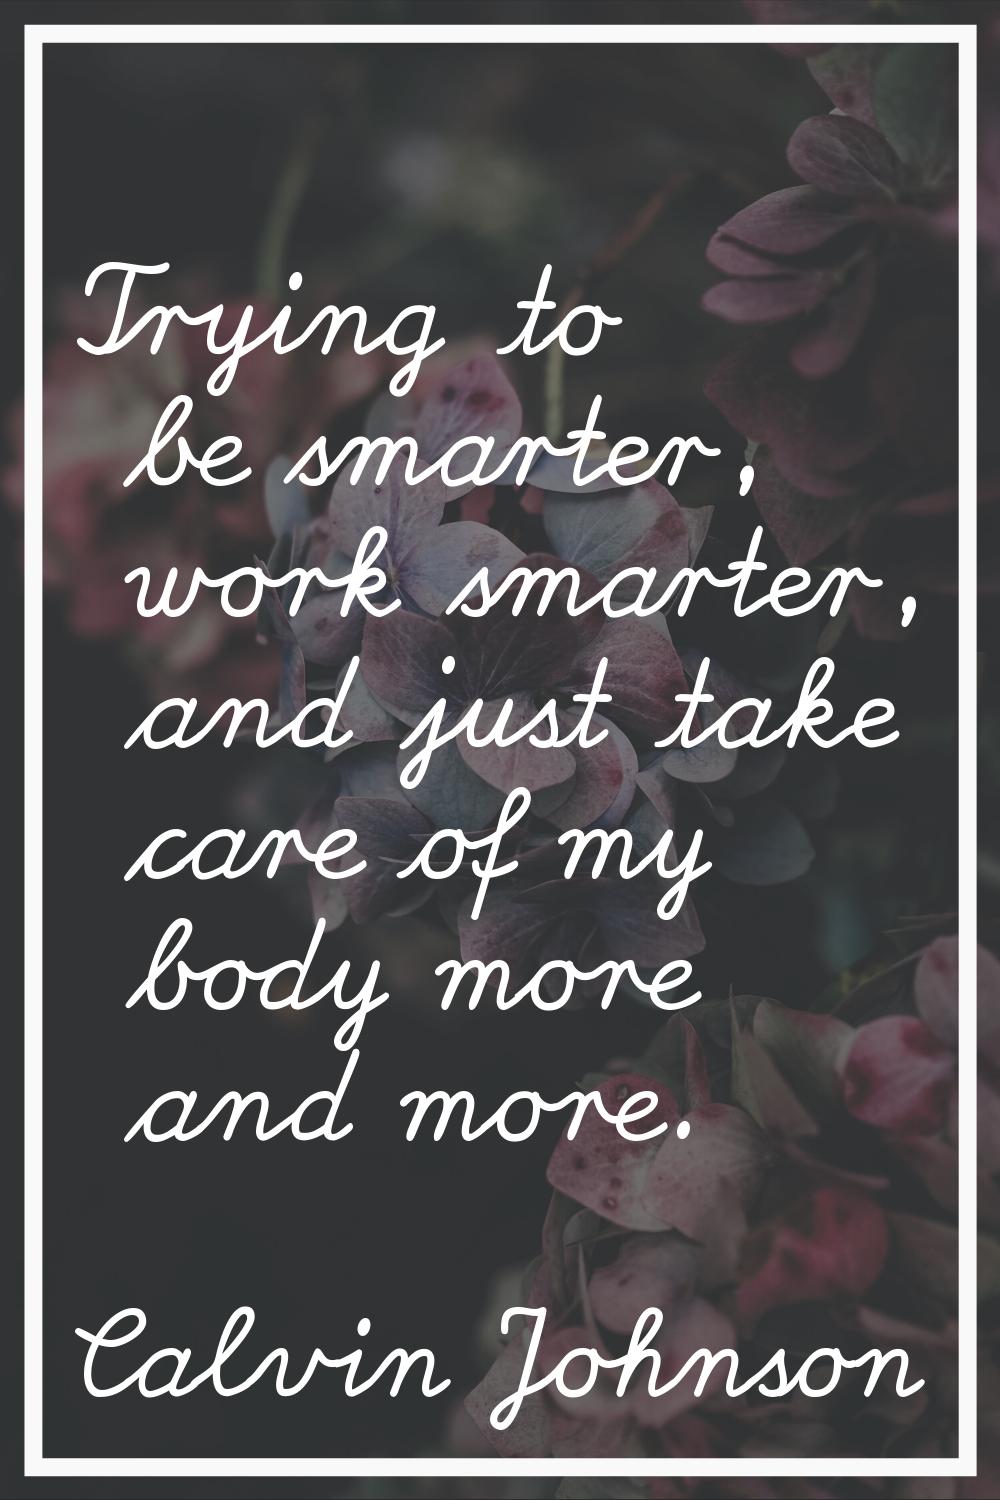 Trying to be smarter, work smarter, and just take care of my body more and more.